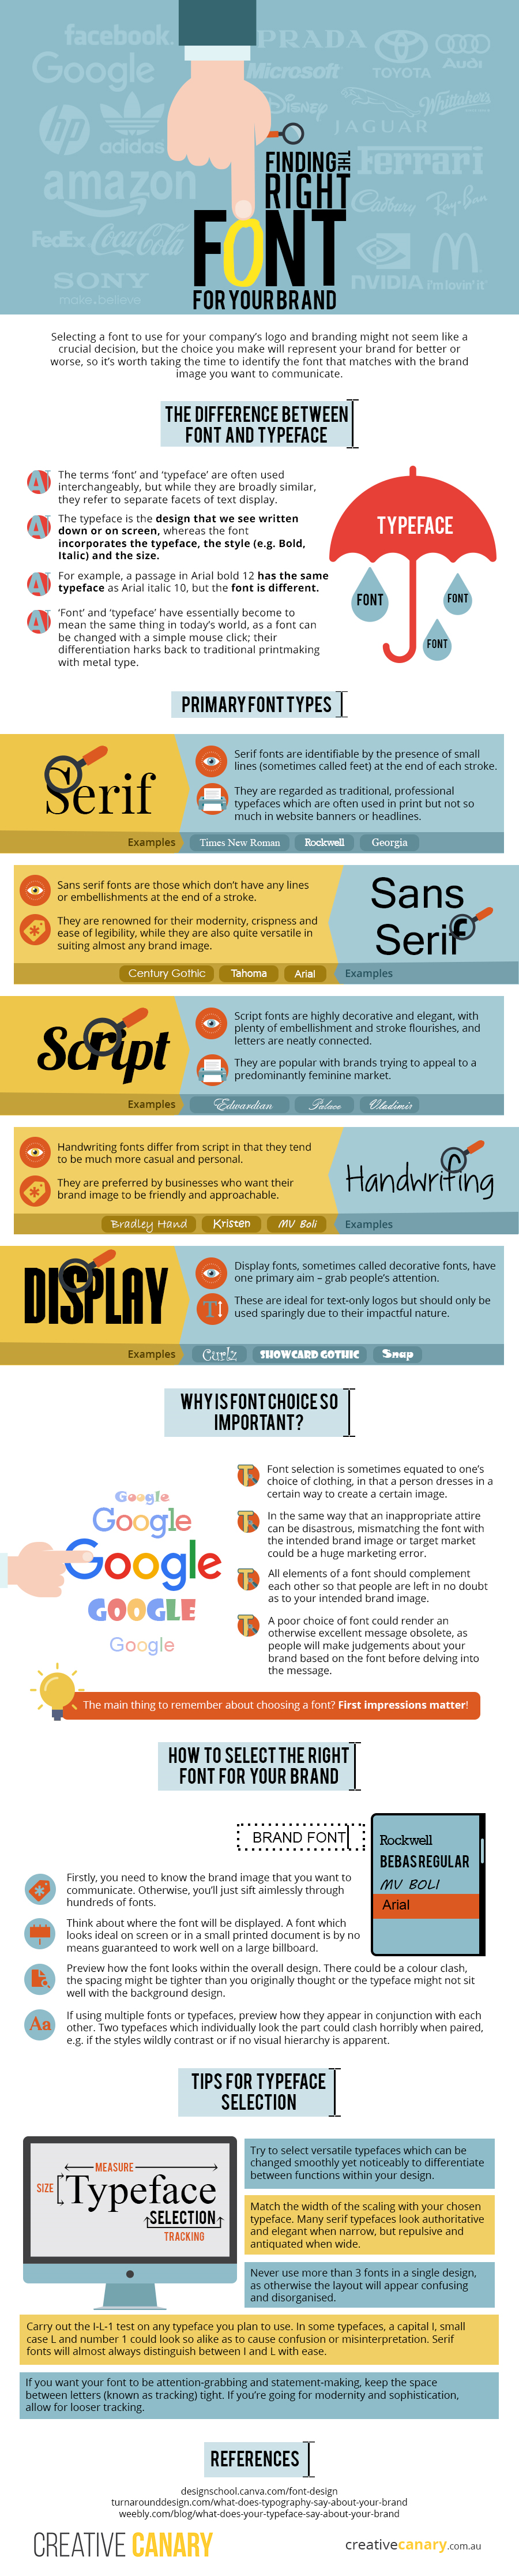 Finding the Right Font for Your Brand - #infographic